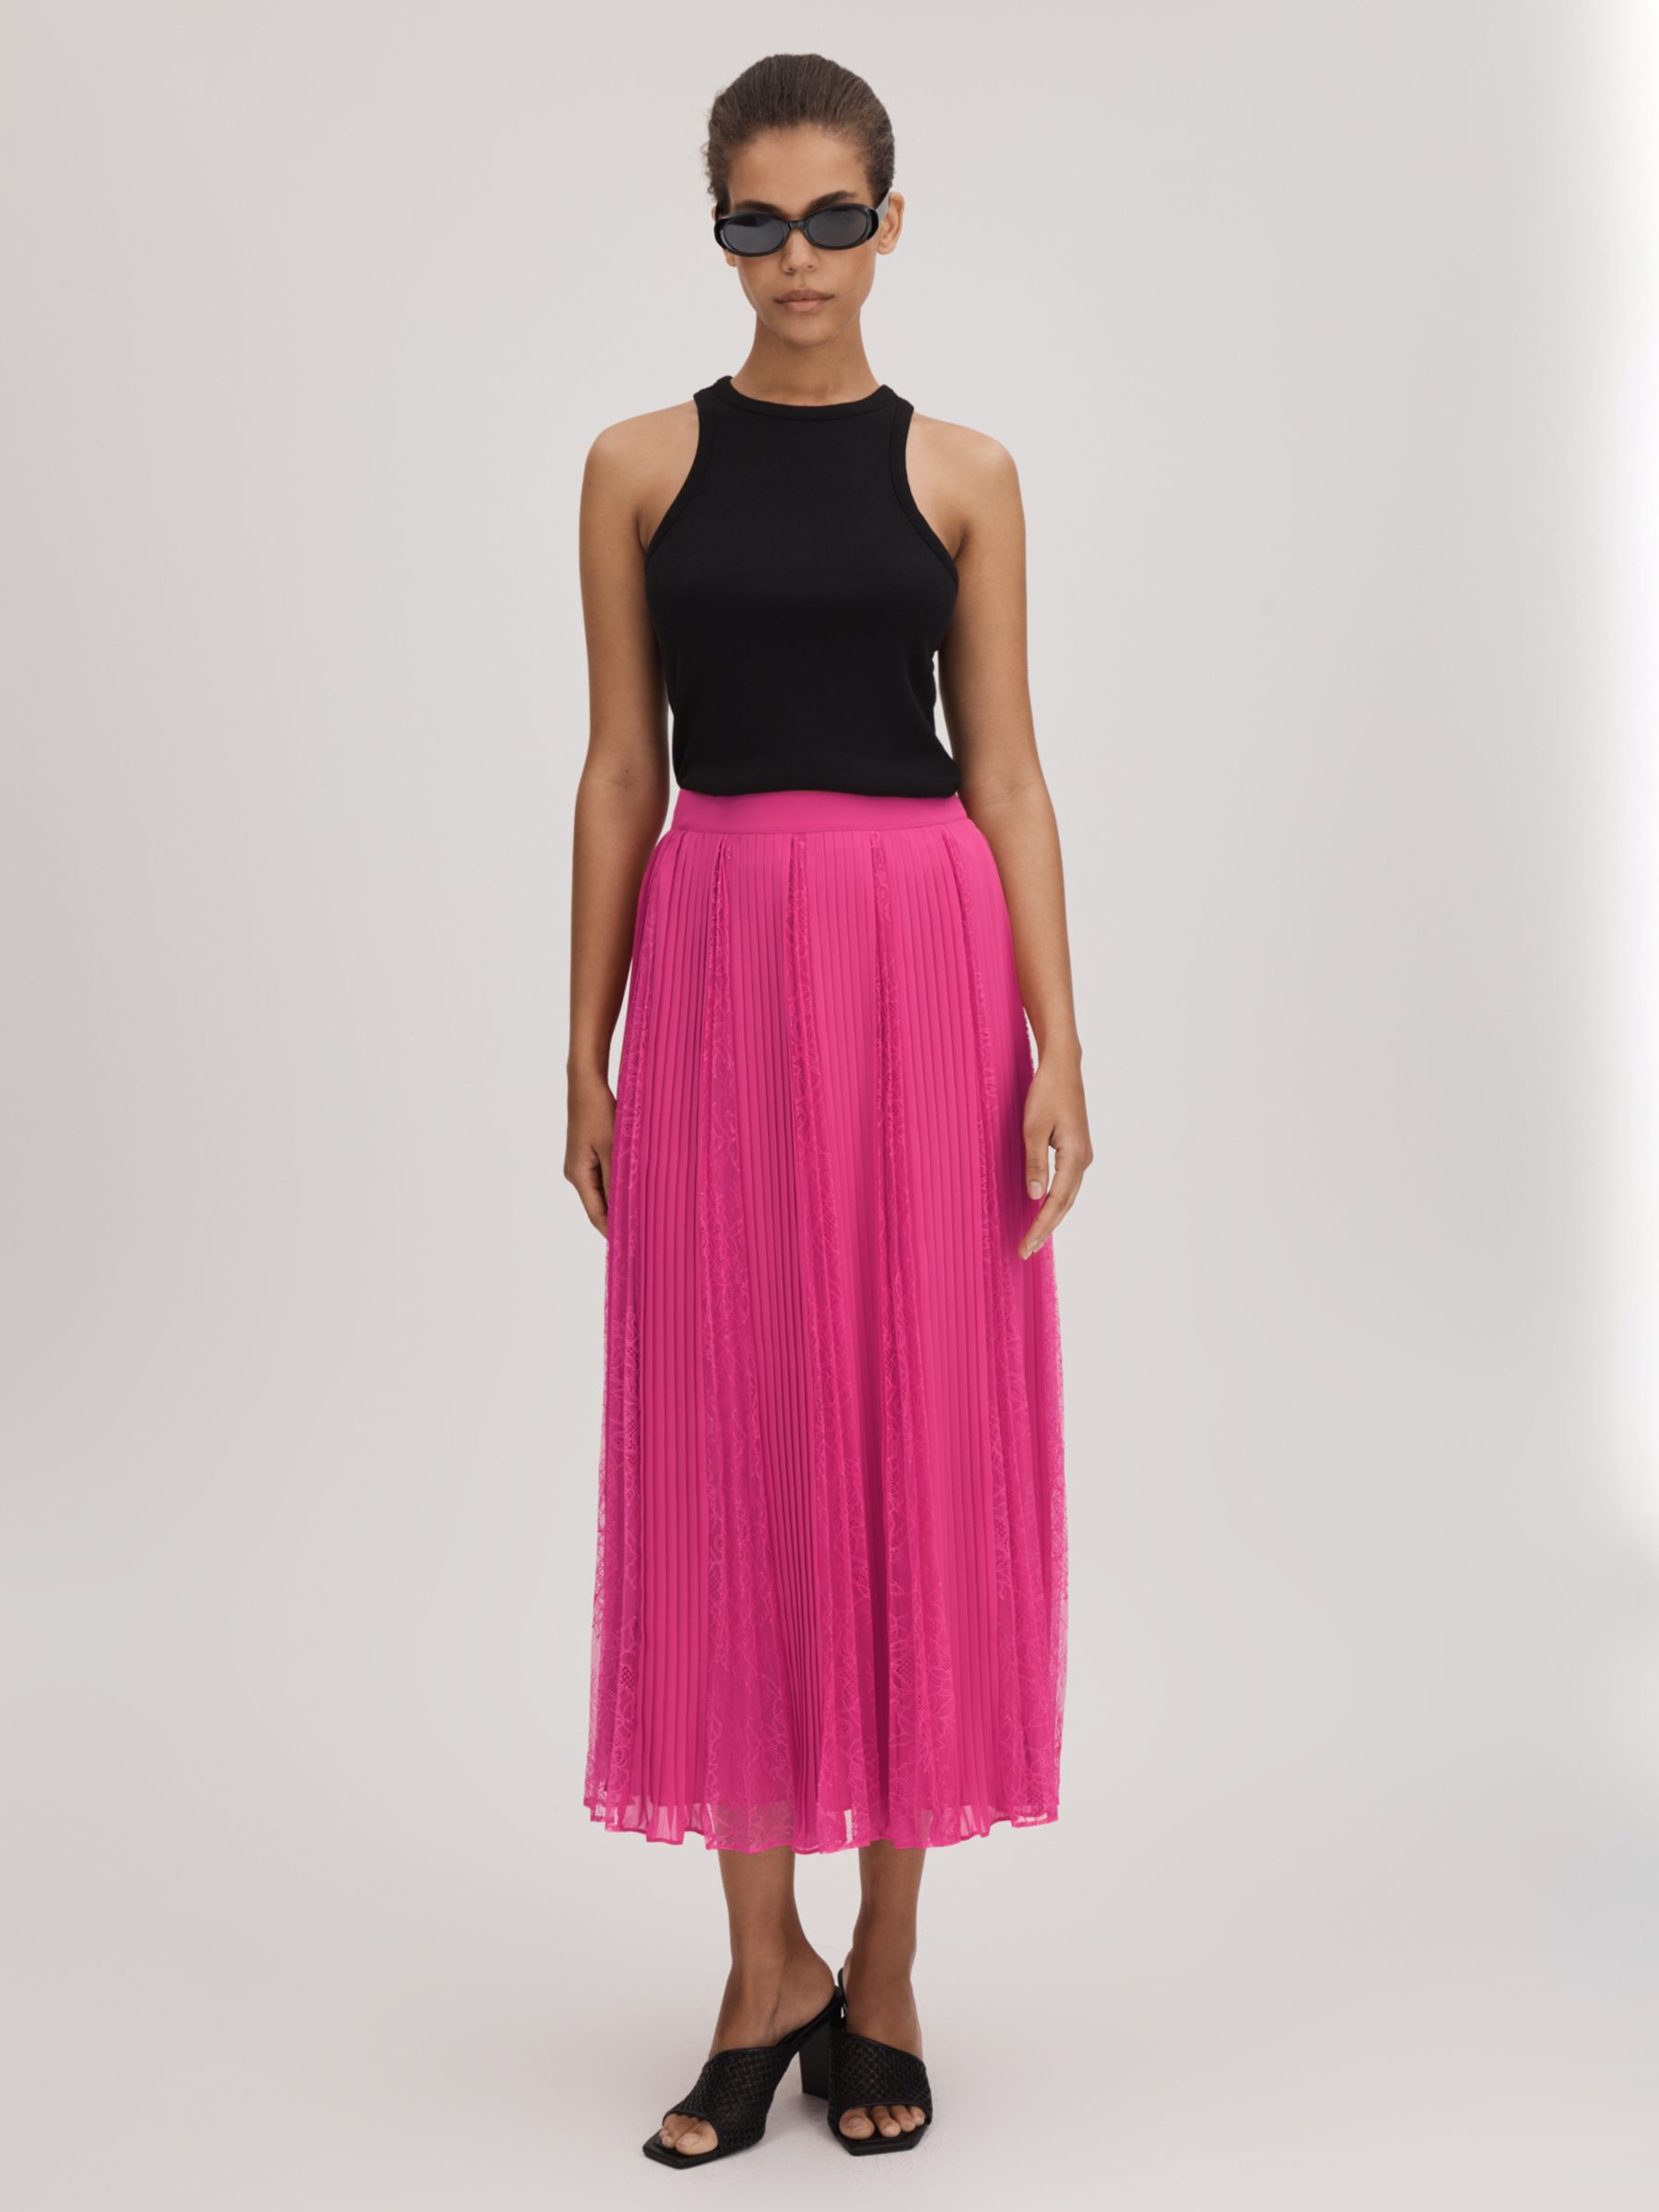 FLORERE Lace Insert Pleated Midi Skirt, Bright Pink, 12